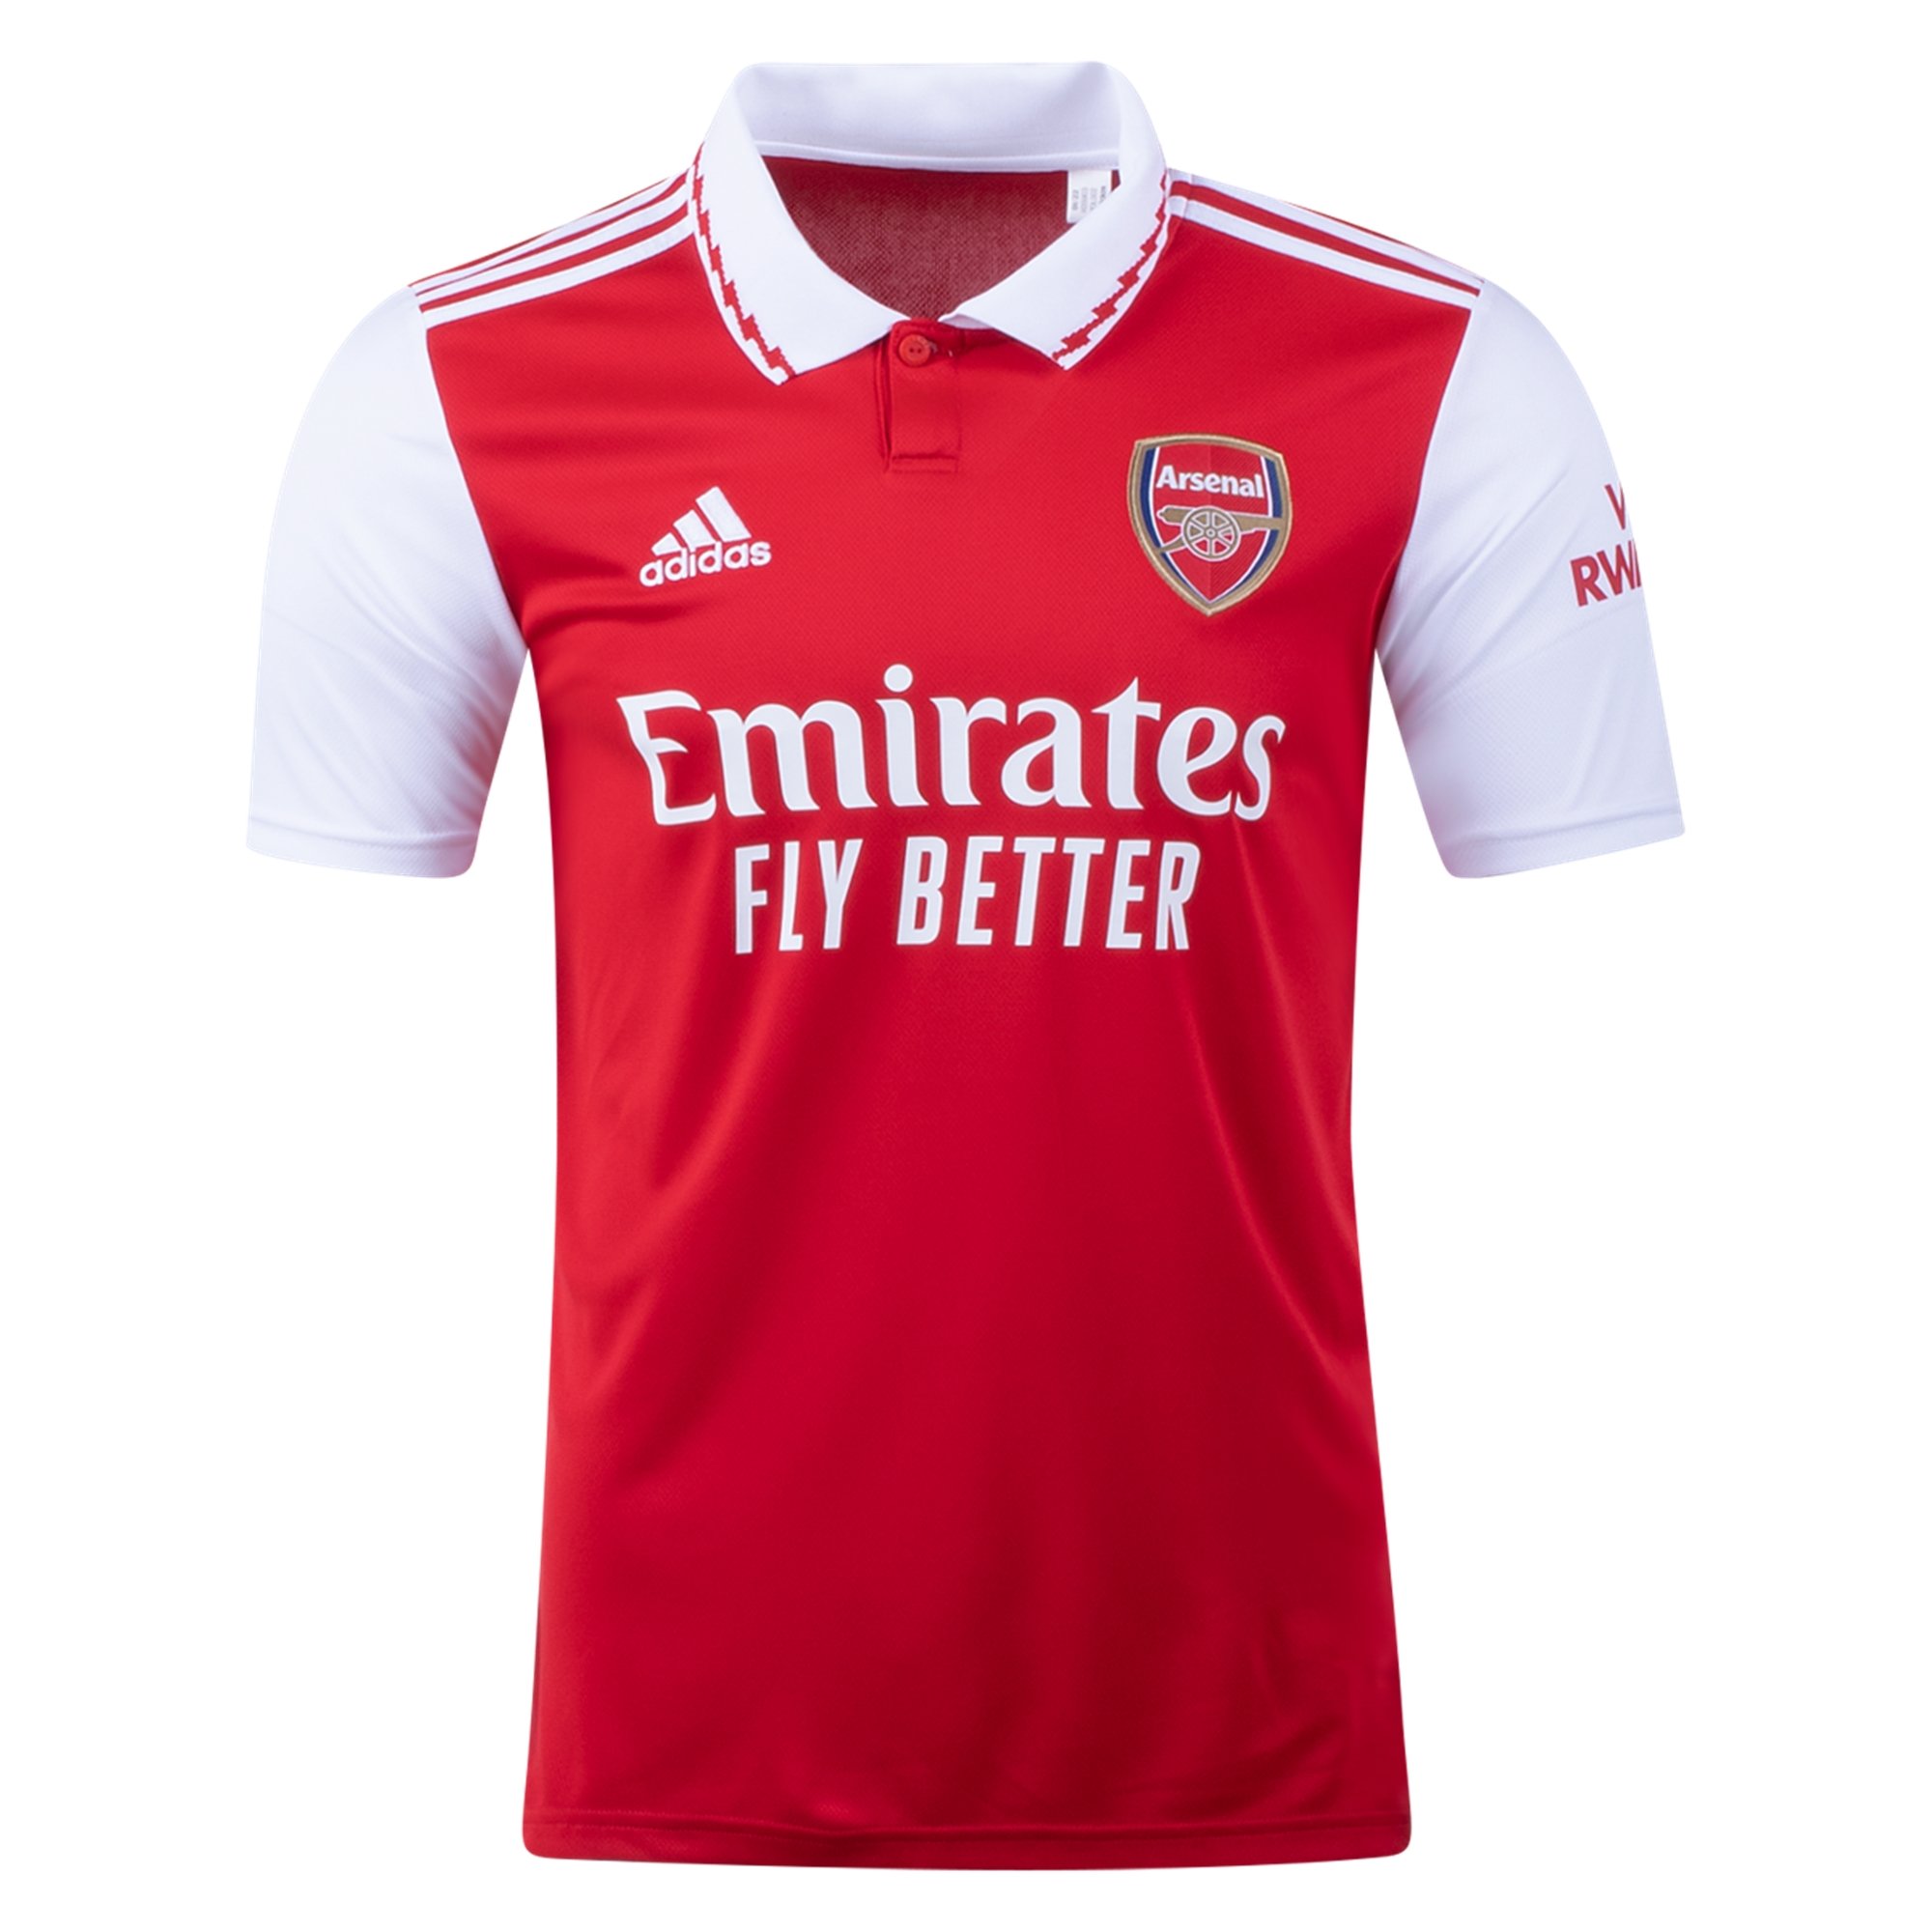 Arsenal Home Jersey by adidas - Arena Jerseys